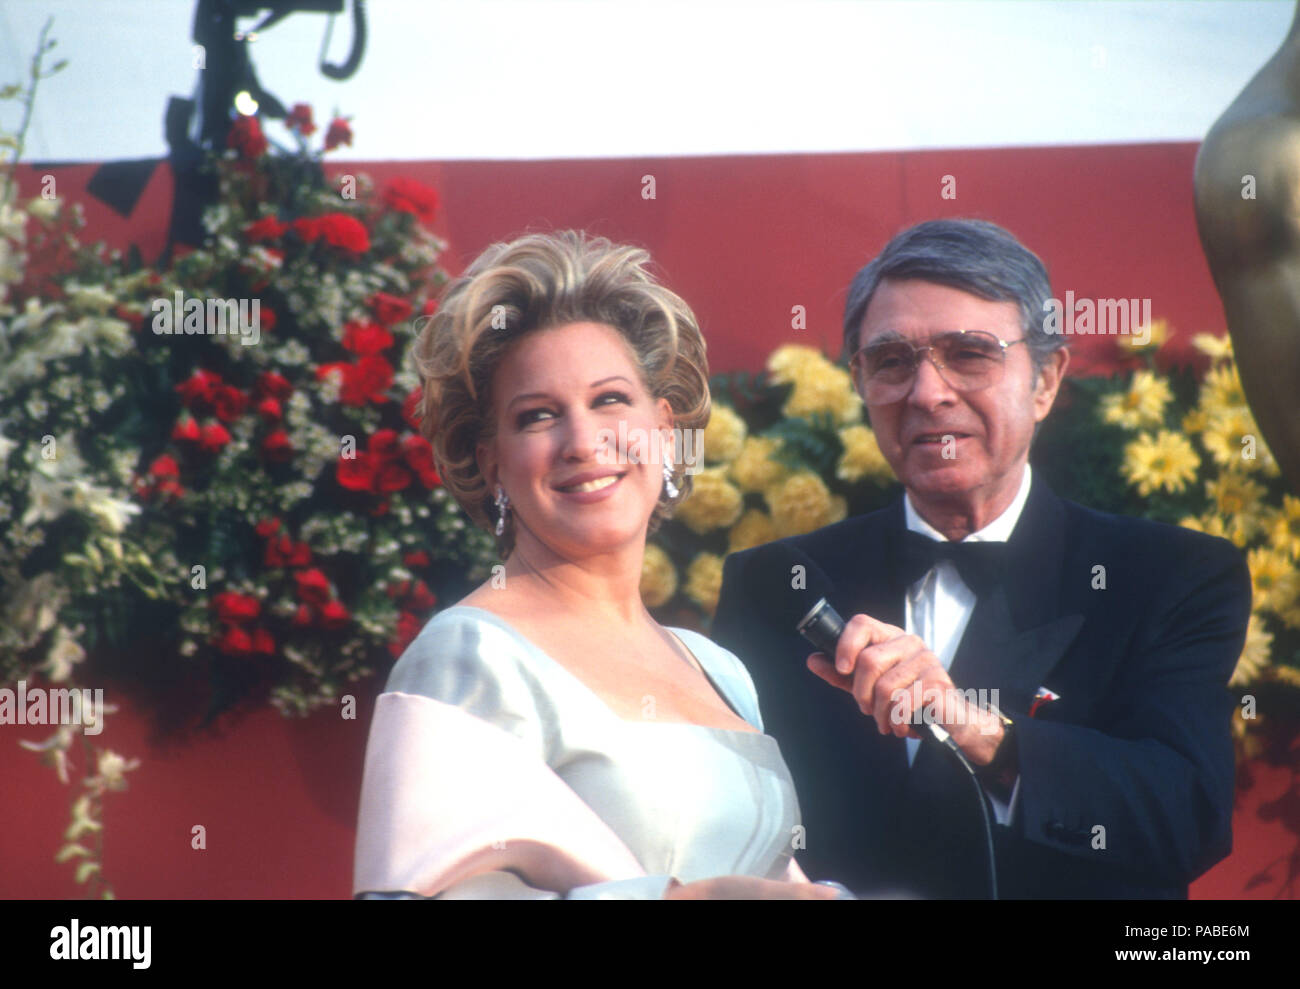 los-angeles-ca-march-30-singer-bette-midler-ad-army-archerd-attend-the-64th-annual-academy-awards-on-march-30-1992-at-the-dorothy-chandler-pavilion-in-los-angeles-california-photo-by-barry-kingalamy-stock-photo-PABE6M.jpg